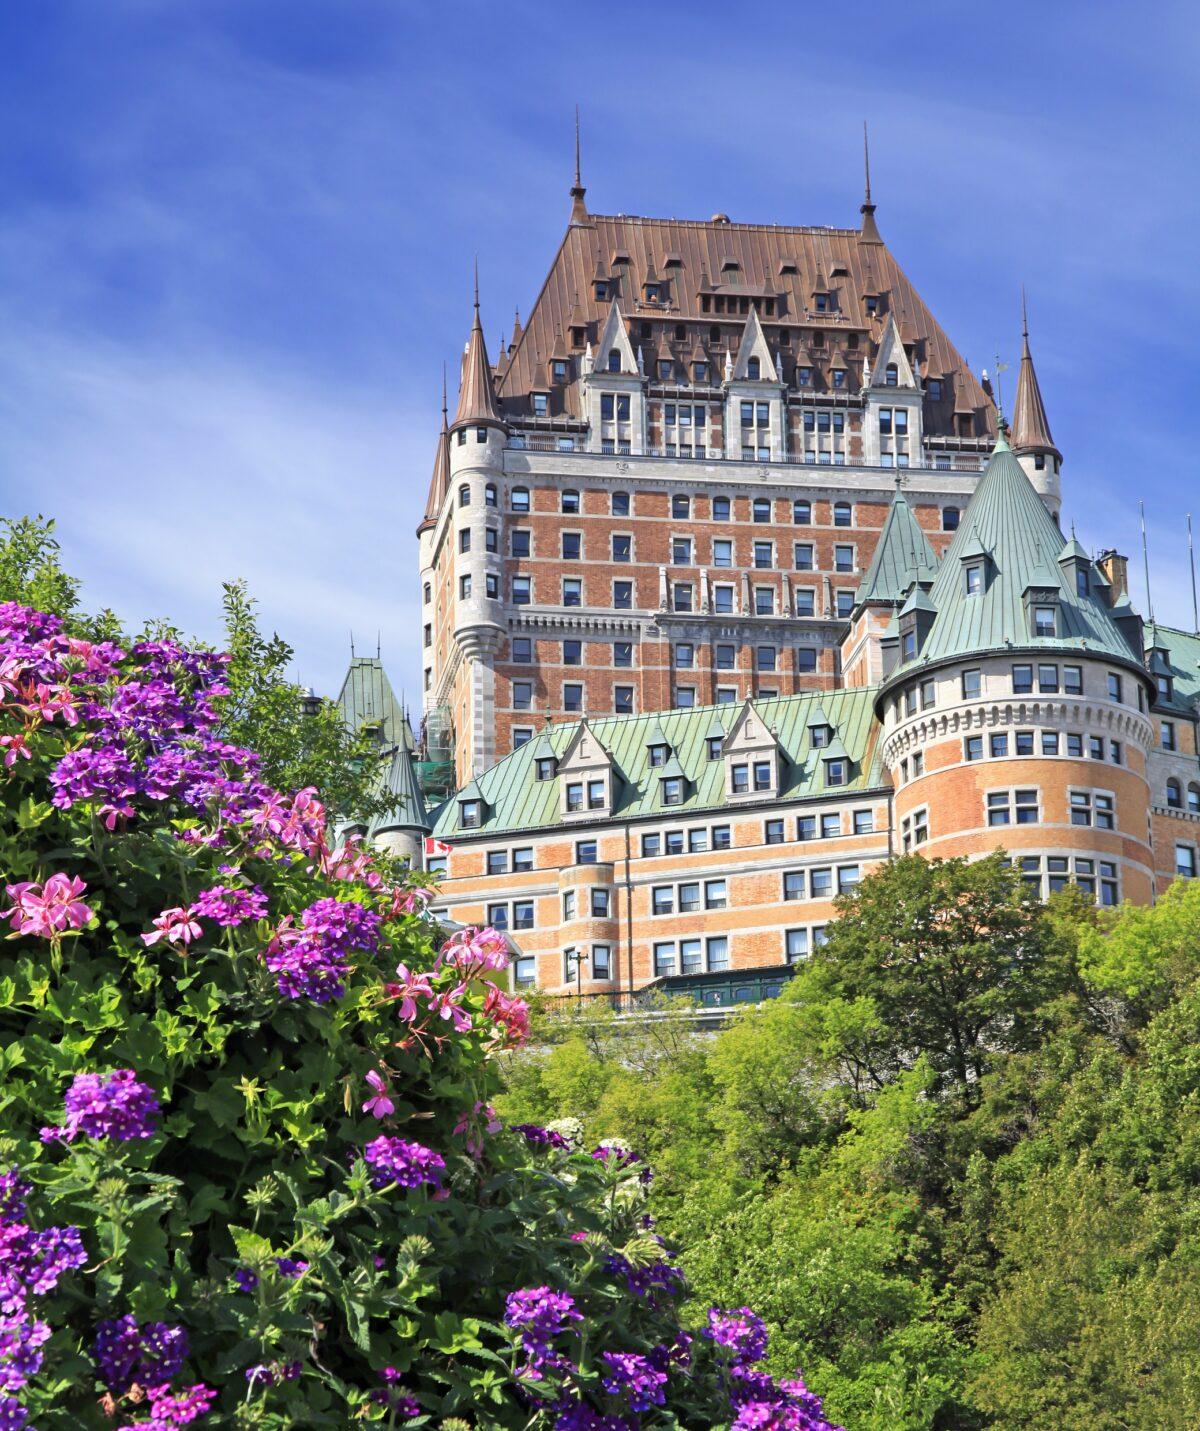 Chateau Frontenac figures prominently in iconic views of Quebec City. (Shutterstock)